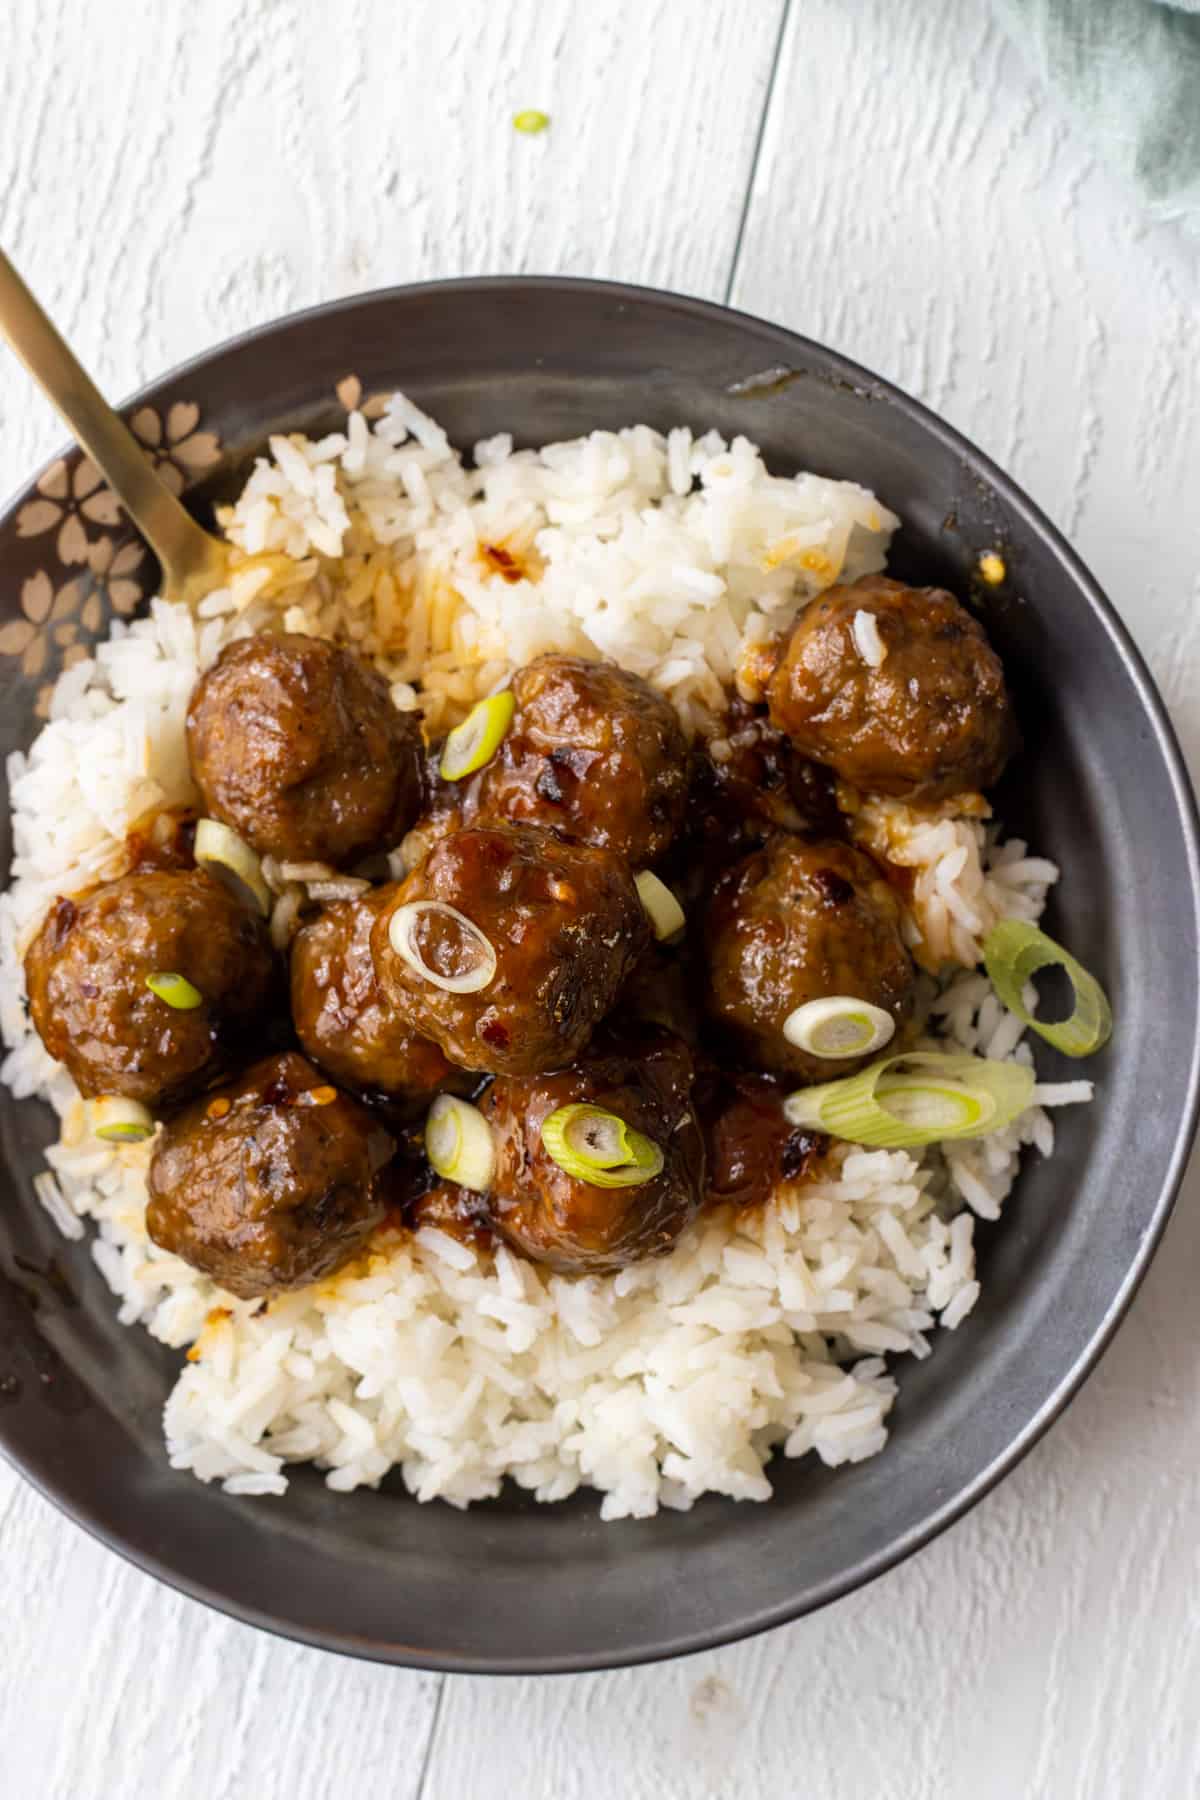 Sweet and spicy meatballs on top of white rice with sliced green onions, a fork, and a towel on the side.